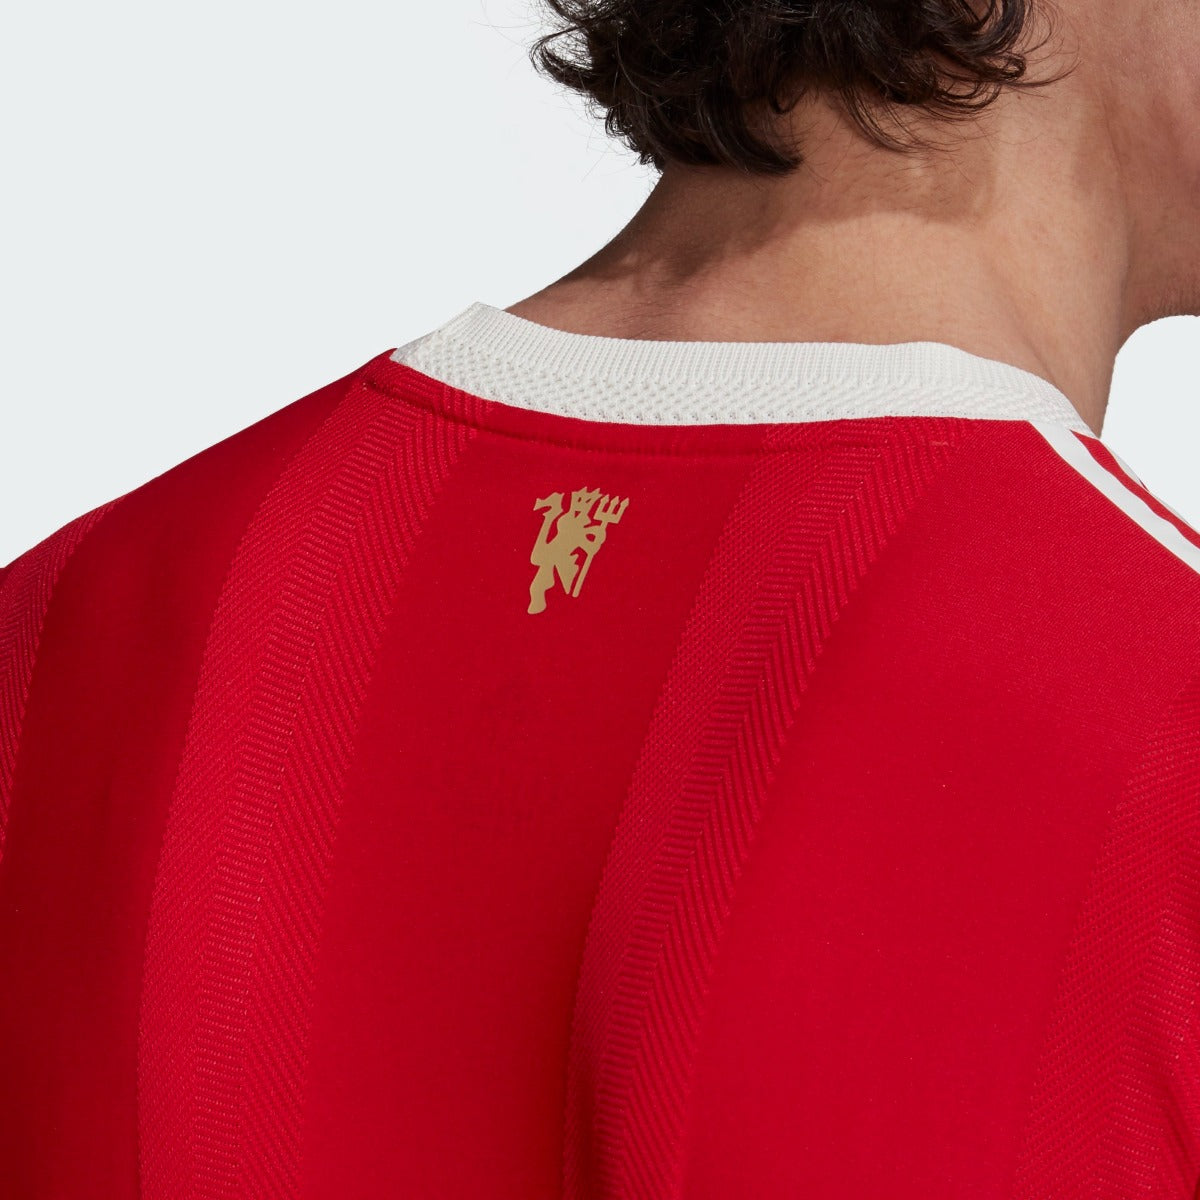 Adidas 2021-22 Manchester United Authentic Home jersey - Red-White (Detail 2)